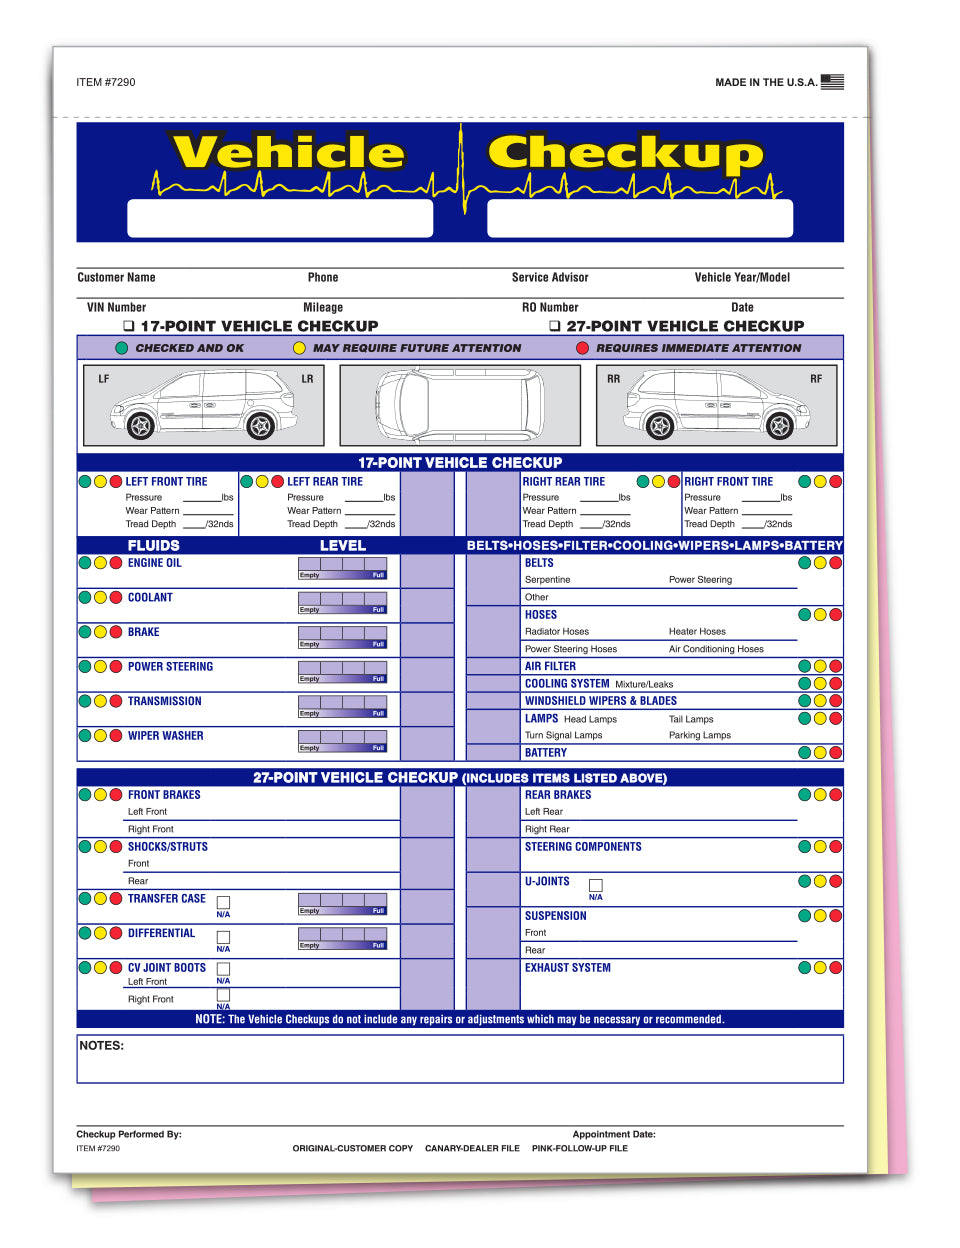 Multi-Point Inspection Forms - Generic Vehicle Cleanup www.flywheelnw.com